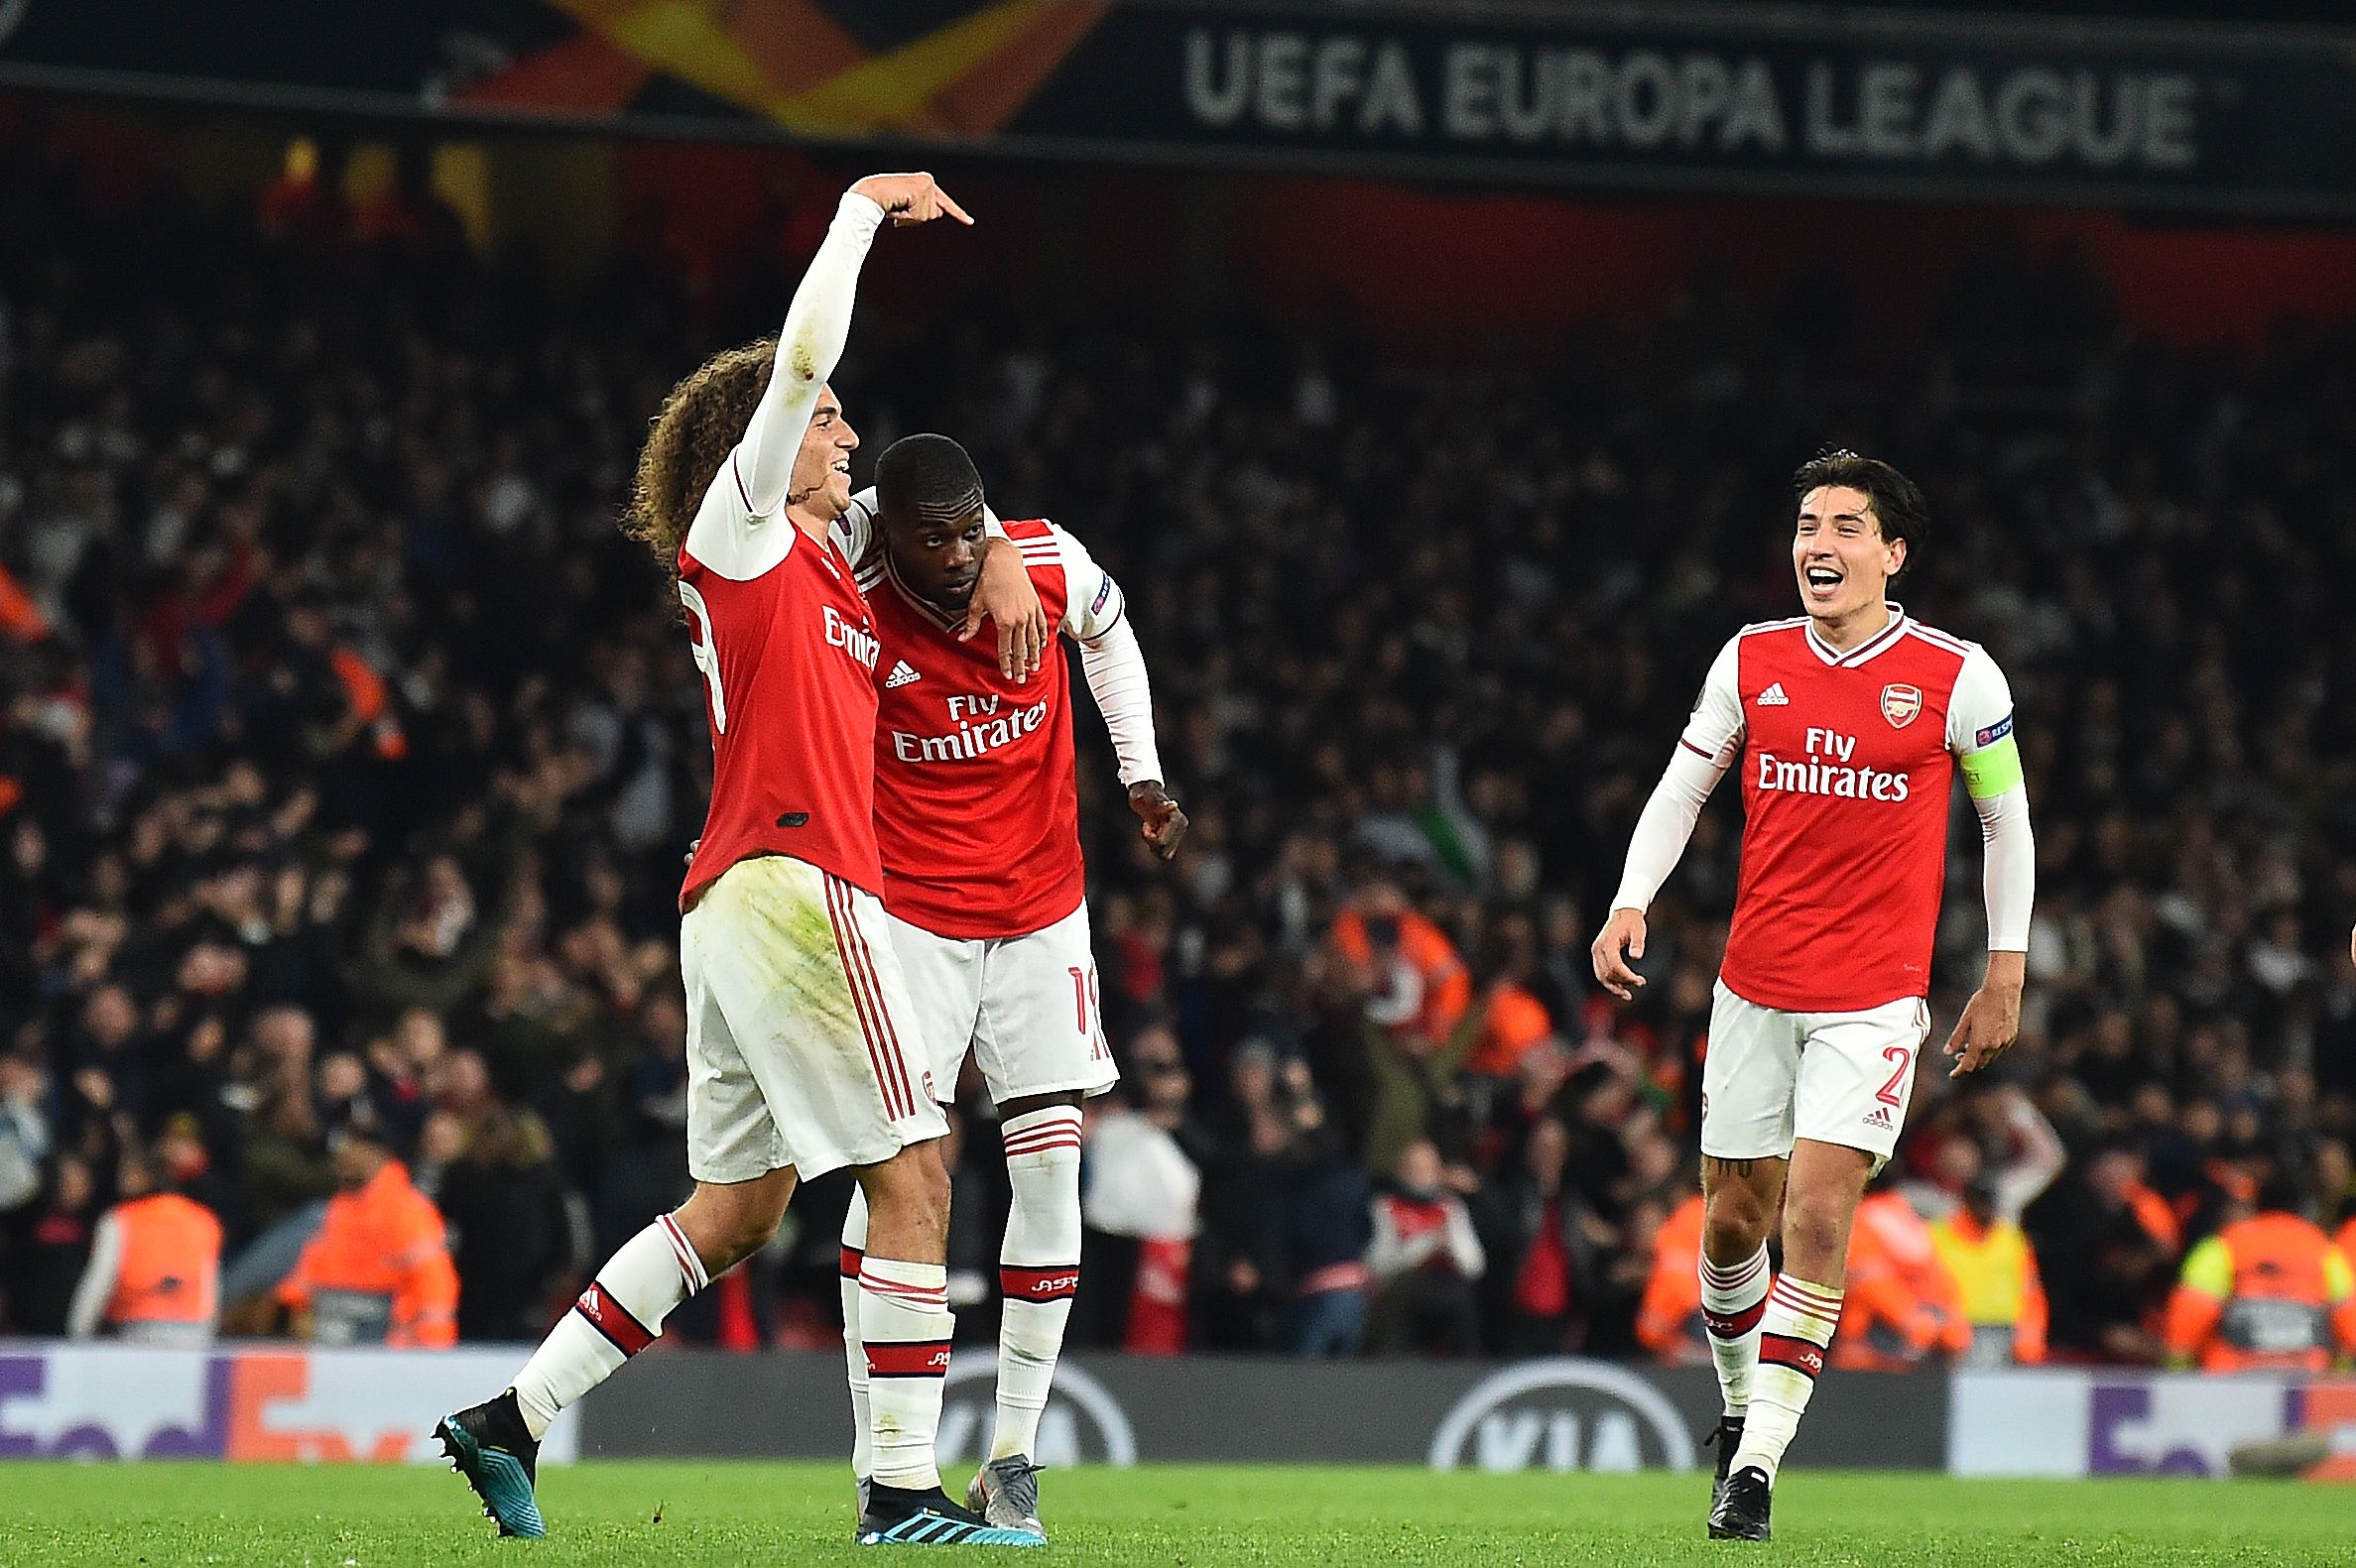 Arsenal's French-born Ivorian midfielder Nicolas Pepe (C) celebrates scoring his team's third goal with Arsenal's French midfielder Matteo Guendouzi (L) and Arsenal's Spanish defender Hector Bellerin during their UEFA Europa league Group F football match between Arsenal and Vitoria Guimaraes at the Emirates stadium in London on October 24, 2019. (Photo by Glyn KIRK / AFP) (Photo by GLYN KIRK/AFP via Getty Images)